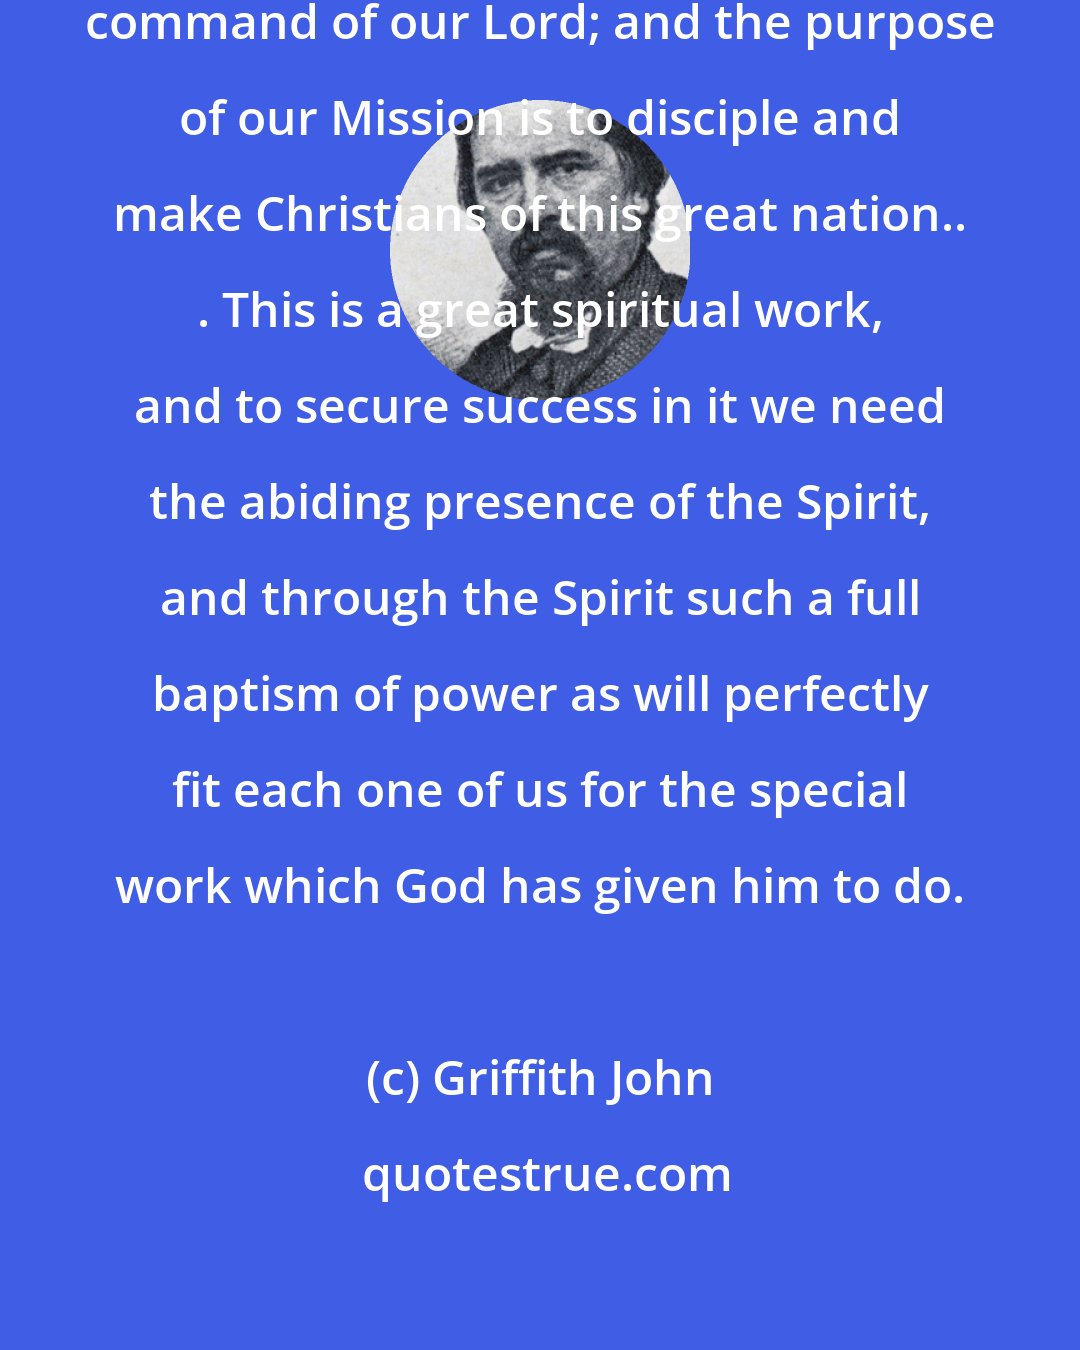 Griffith John: We are in China in obedience to the command of our Lord; and the purpose of our Mission is to disciple and make Christians of this great nation.. . This is a great spiritual work, and to secure success in it we need the abiding presence of the Spirit, and through the Spirit such a full baptism of power as will perfectly fit each one of us for the special work which God has given him to do.